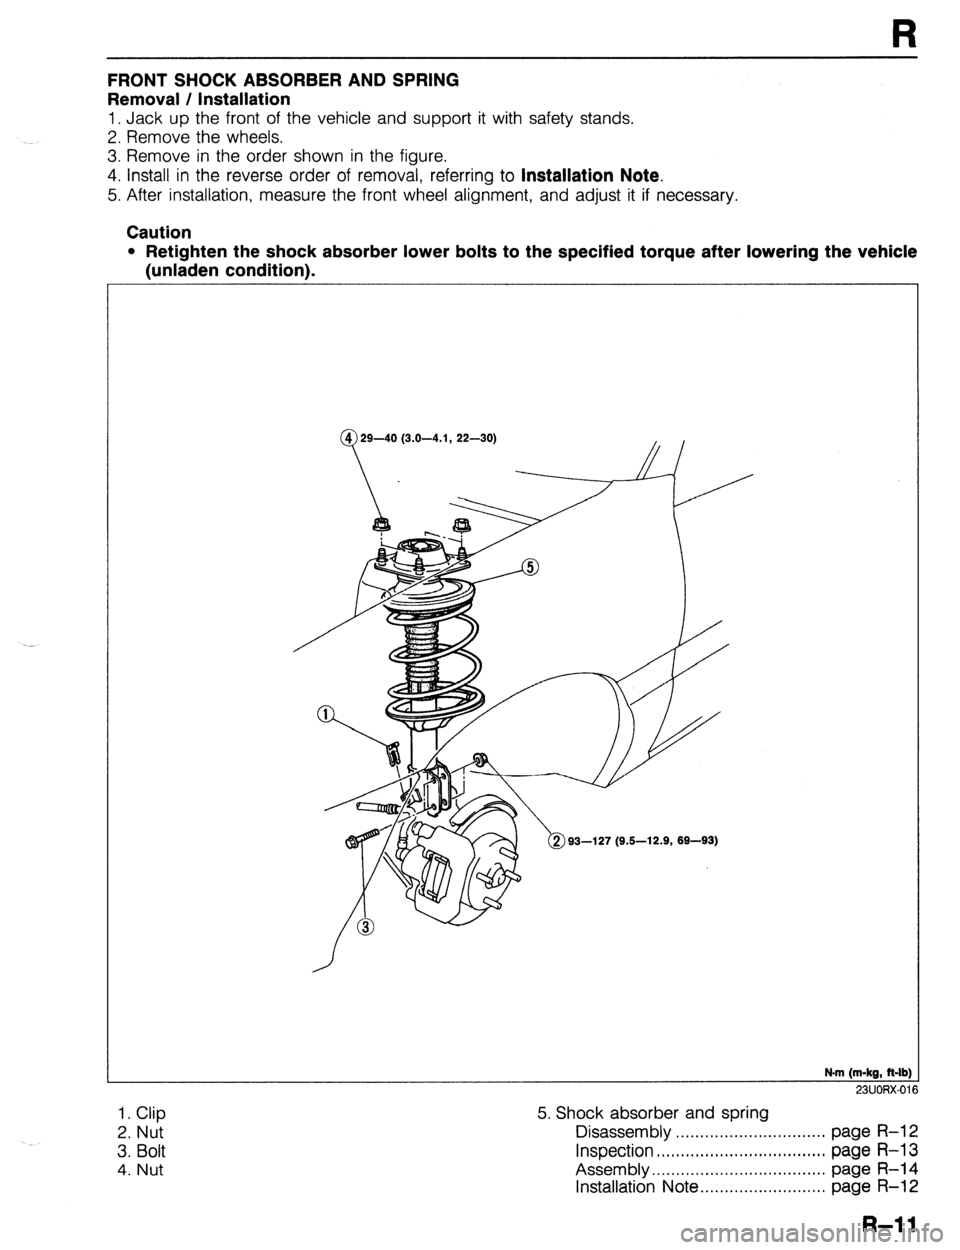 MAZDA PROTEGE 1992  Workshop Manual R 
FRONTSHOCKABSORBERANDSPRING 
Removal / Installation 
1. Jack up the front of the vehicle and support it with safety stands. 
2. Remove the wheels. 
3. Remove in the order shown in the figure. 
4. I